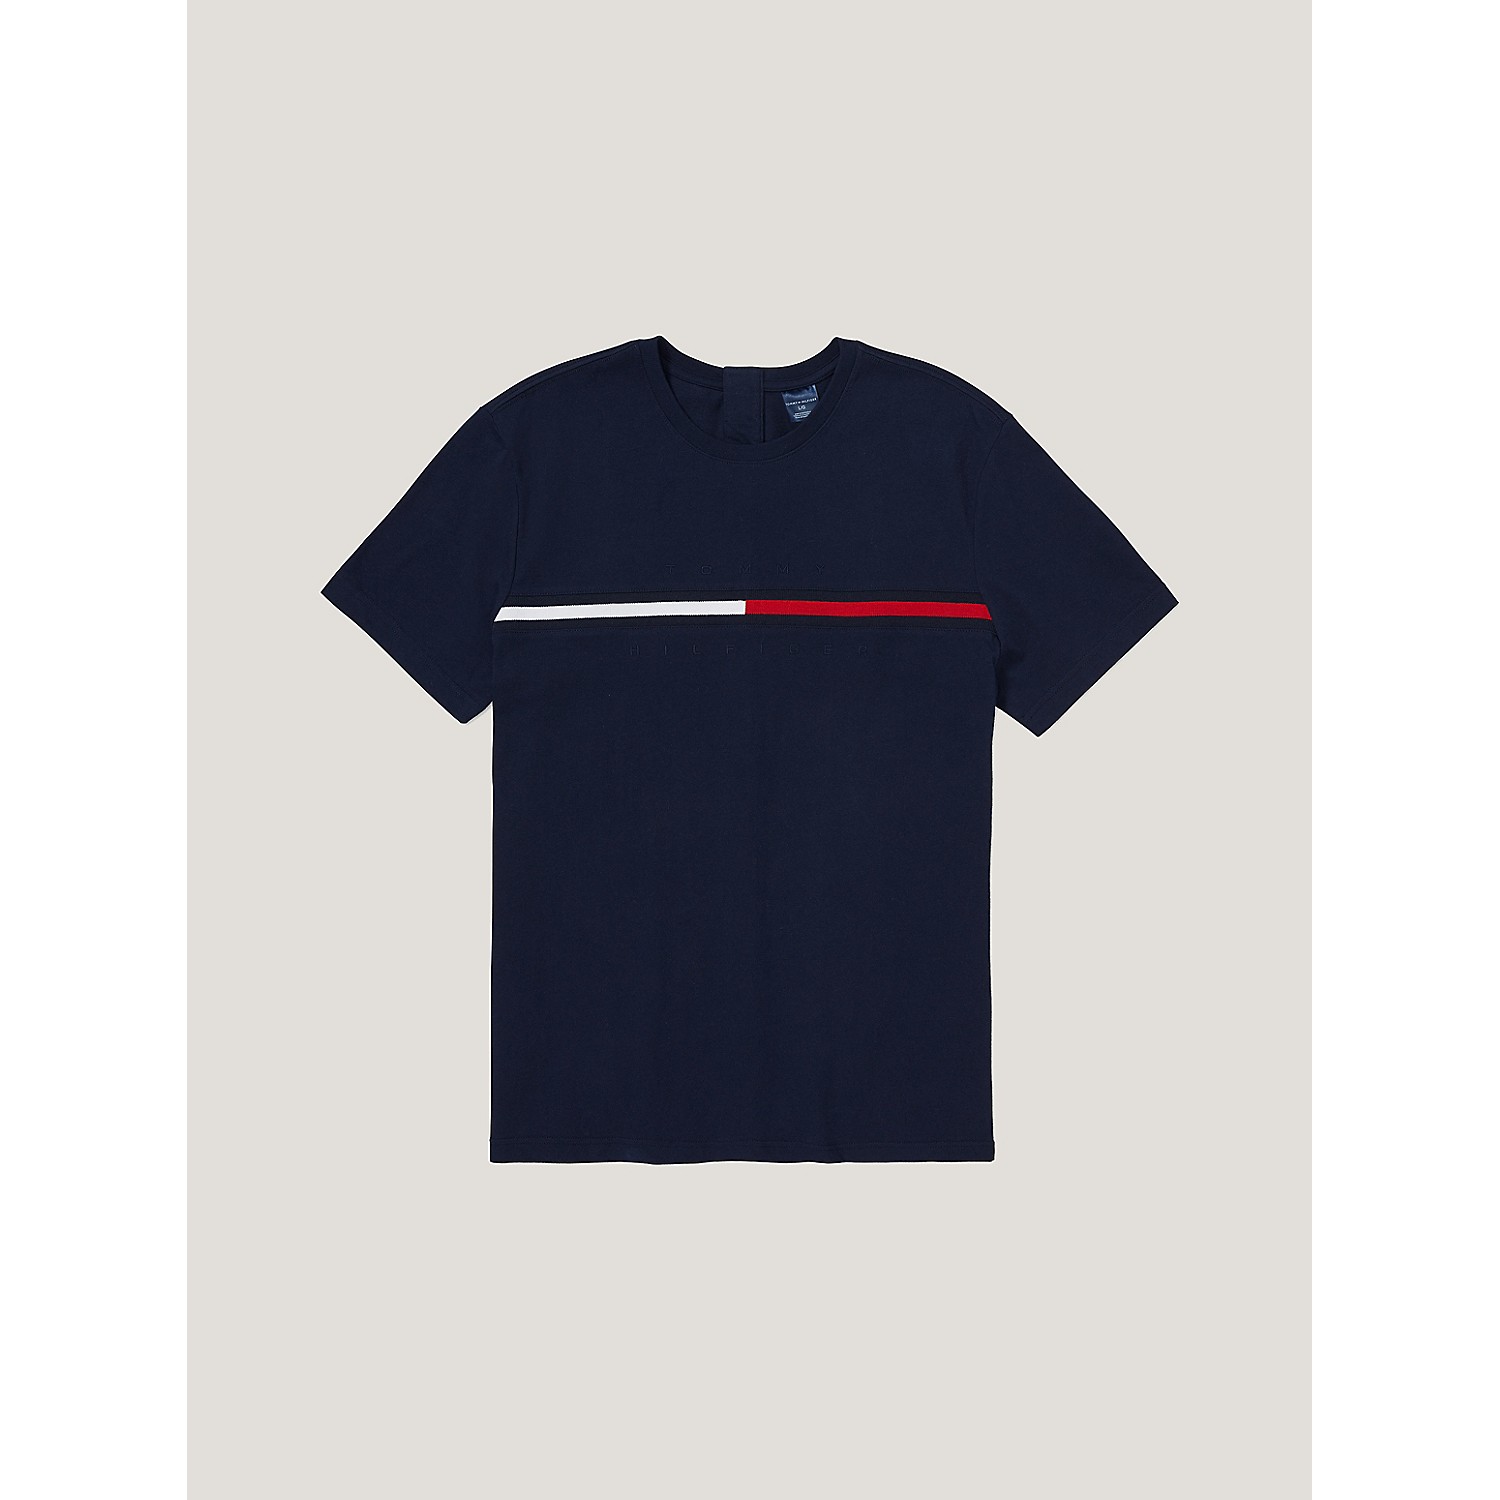 TOMMY HILFIGER Seated Fit Signature Stripe T-Shirt